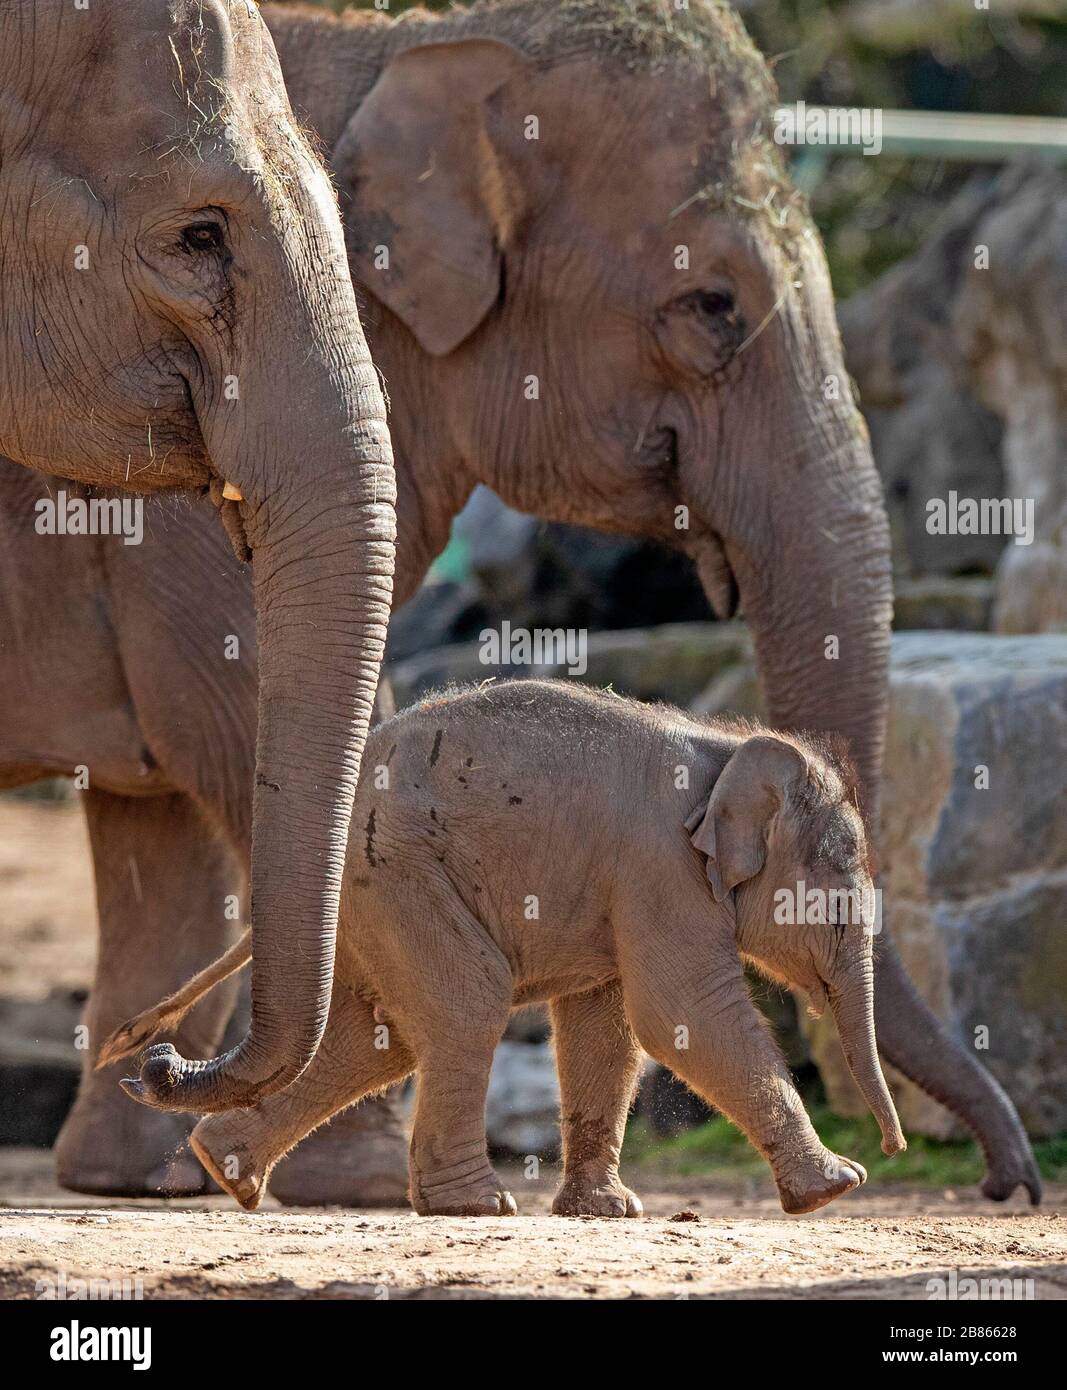 Riva Hi Way, a baby Asian elephant calf born last month at Chester Zoo, makes her public debut alongside her mother 15-year-old Sundara Hi Way (left). PA Photo. Picture date: Friday March 20, 2020. The calf was born after a 22 month pregnancy. Asian elephants are listed as endangered by the International Union for the Conservation of Nature (IUCN) and the species is highly threatened in the wild by habitat loss, poaching, human-wildlife conflict and a deadly herpes virus called Elephant Endotheliotropic Herpesvirus. Photo credit should read: Peter Byrne/PA Wire Stock Photo